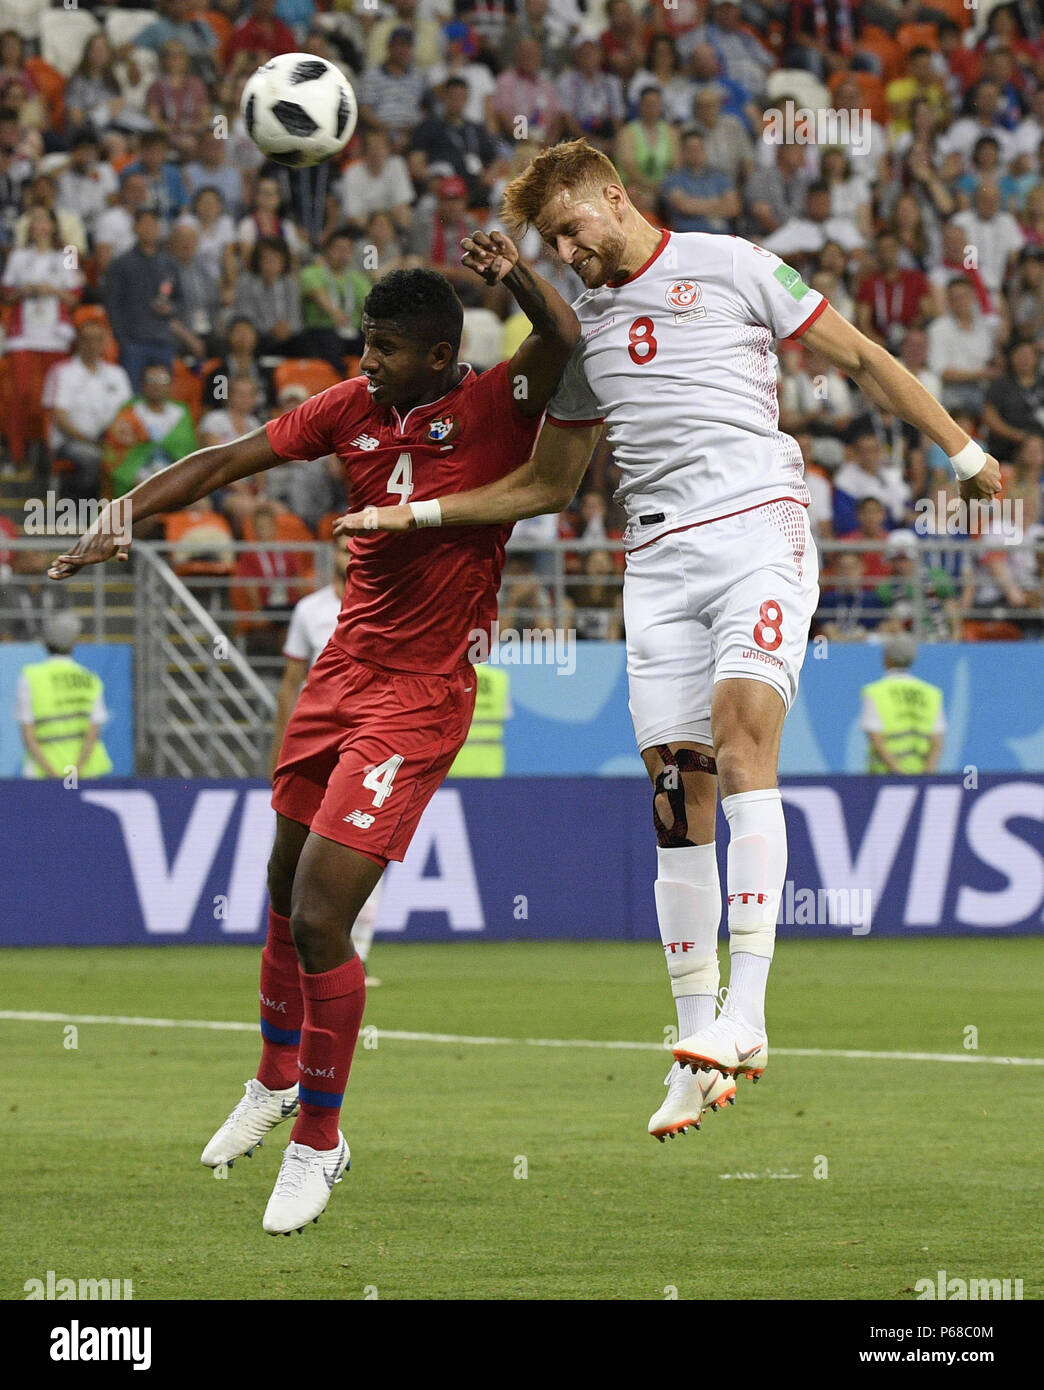 Saransk, Russia. 28th June, 2018. Fidel Escobar (L) of Panama vies with Fakhreddine Ben Youssef of Tunisia during the 2018 FIFA World Cup Group G match between Panama and Tunisia in Saransk, Russia, June 28, 2018. Credit: Lui Siu Wai/Xinhua/Alamy Live News Stock Photo